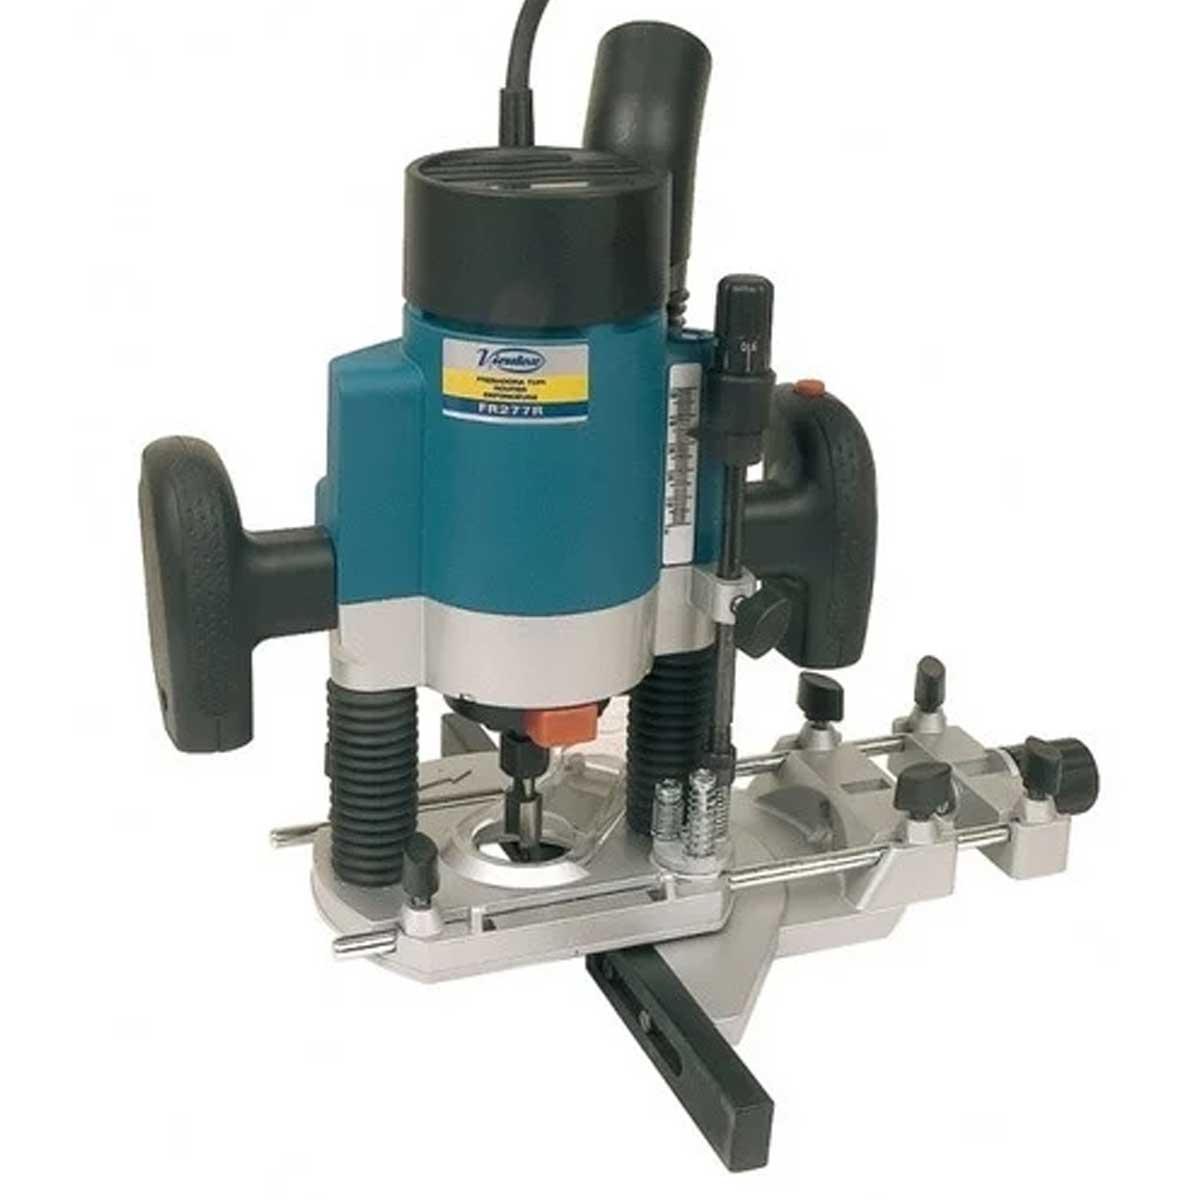 Surface Router Manufacturers, Suppliers in Faridabad